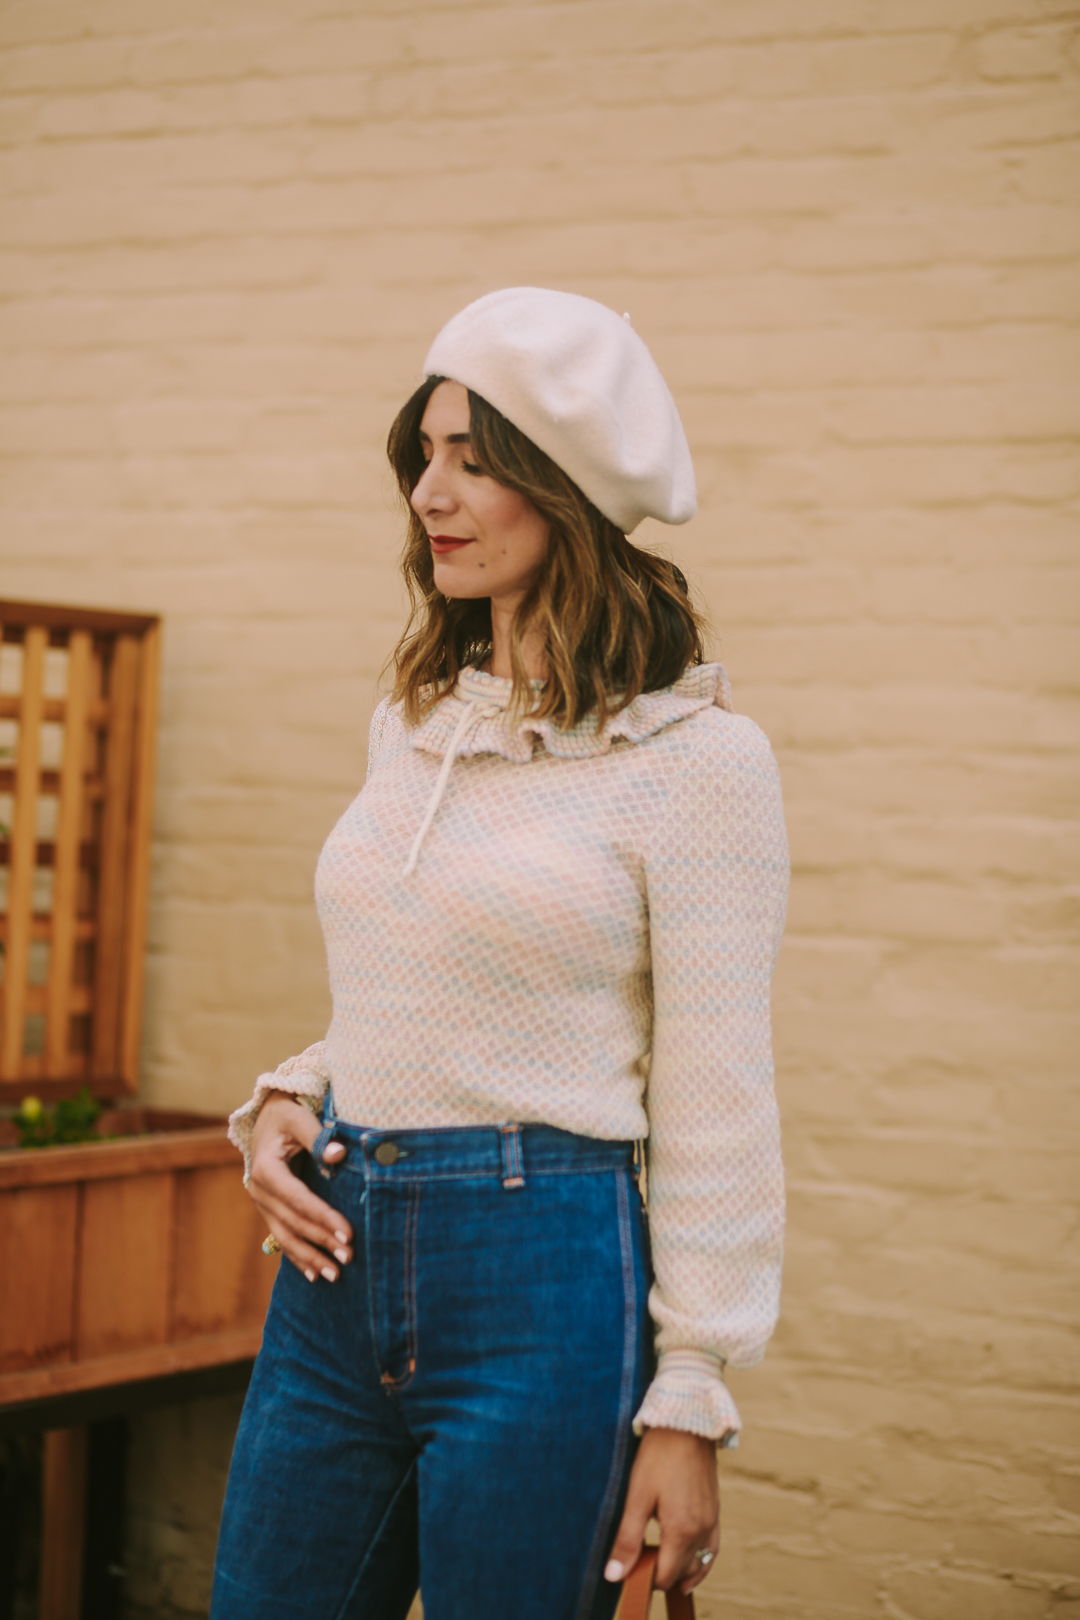 how to style a beret outfit ideas